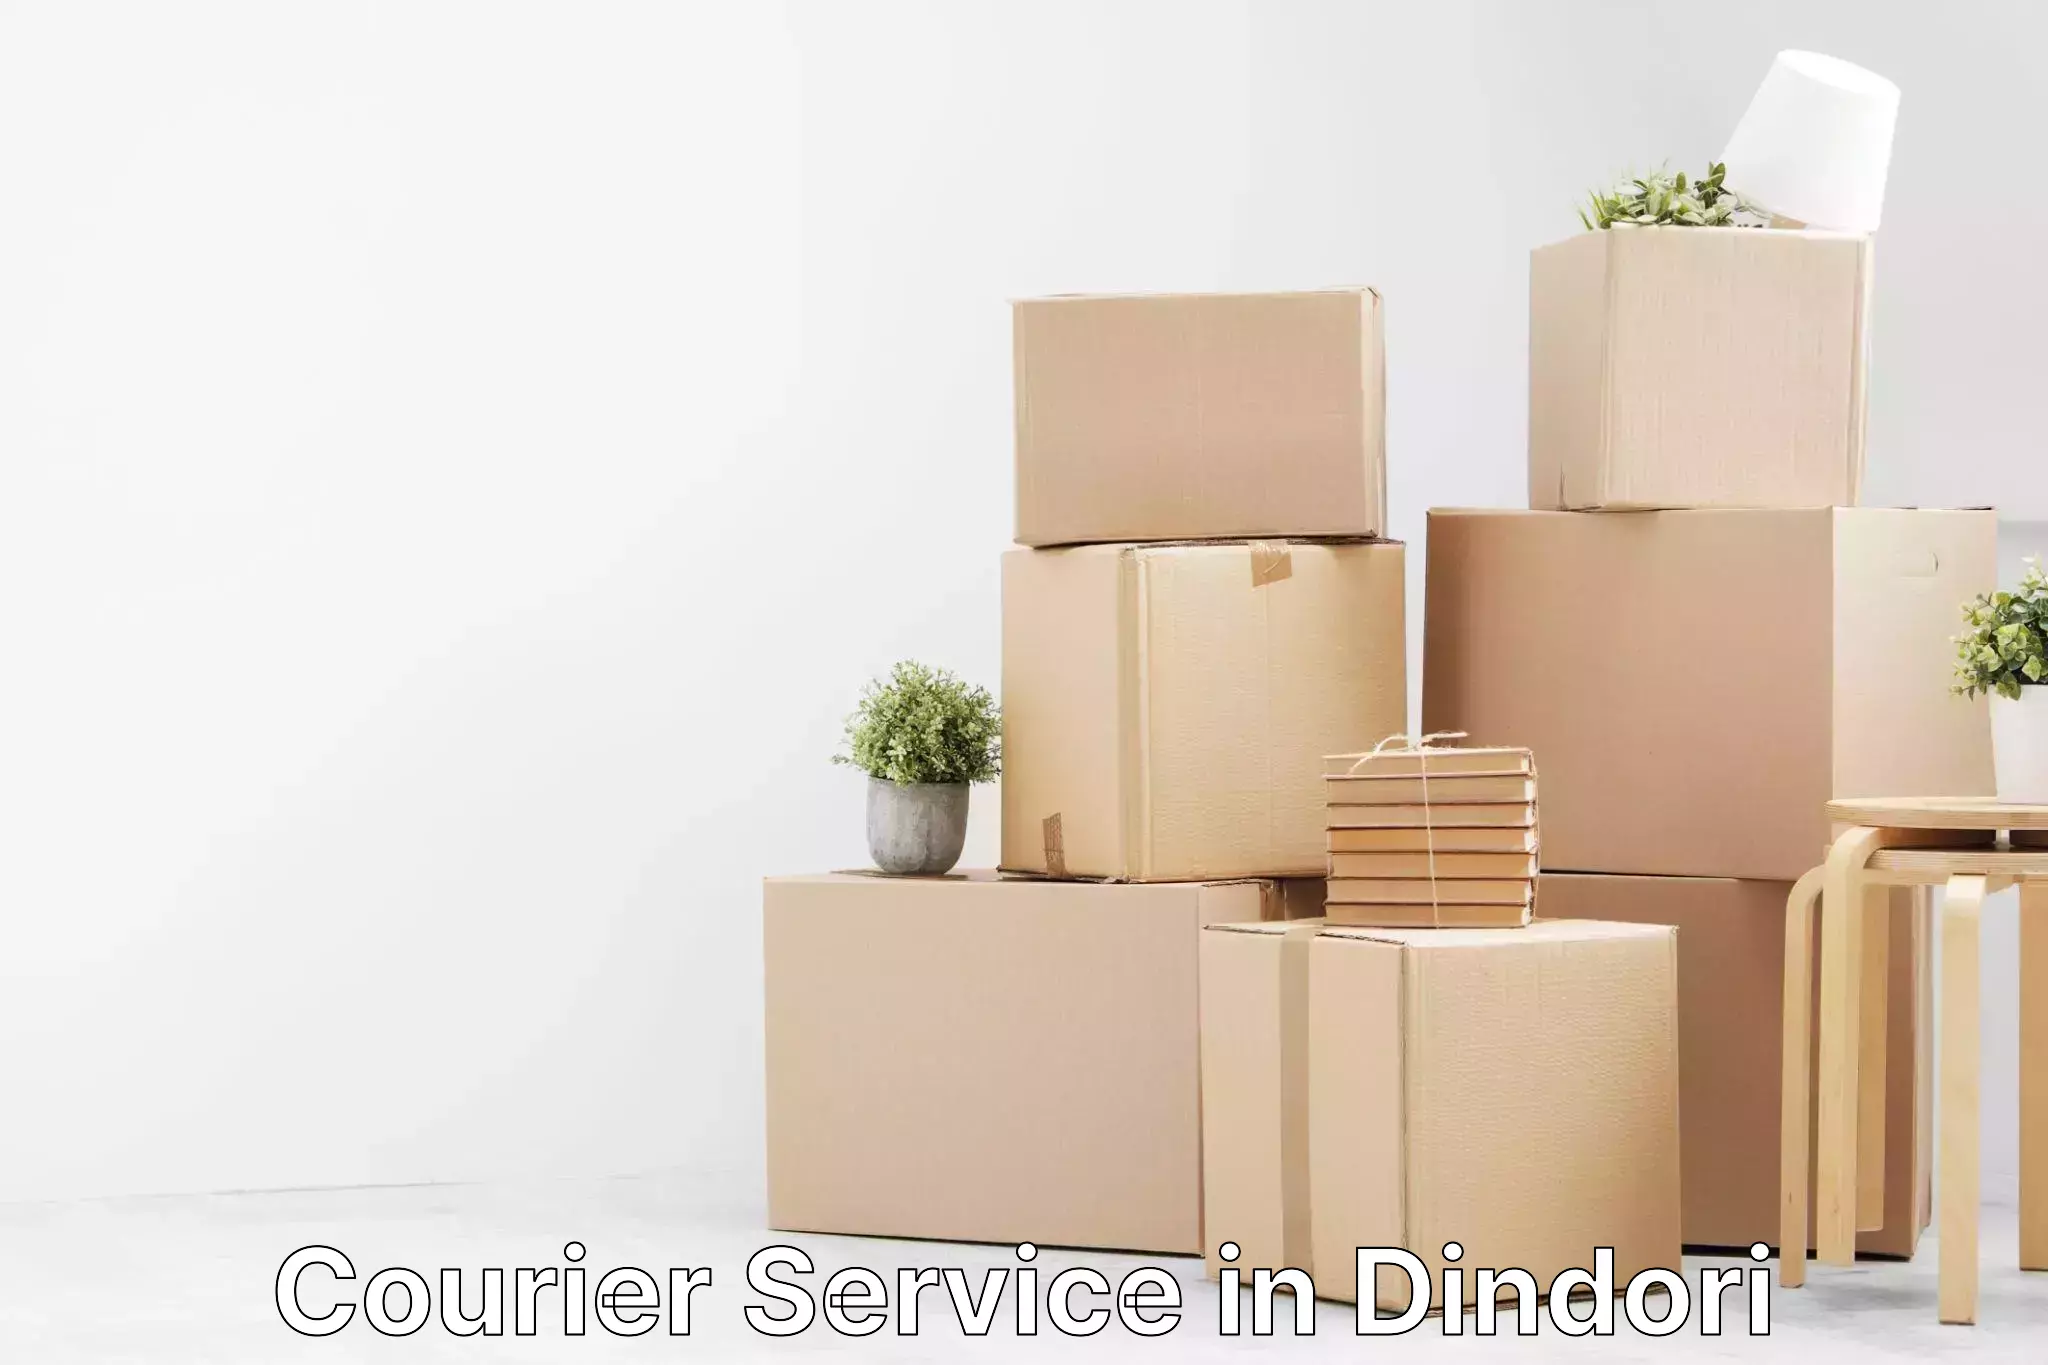 Quality courier partnerships in Dindori